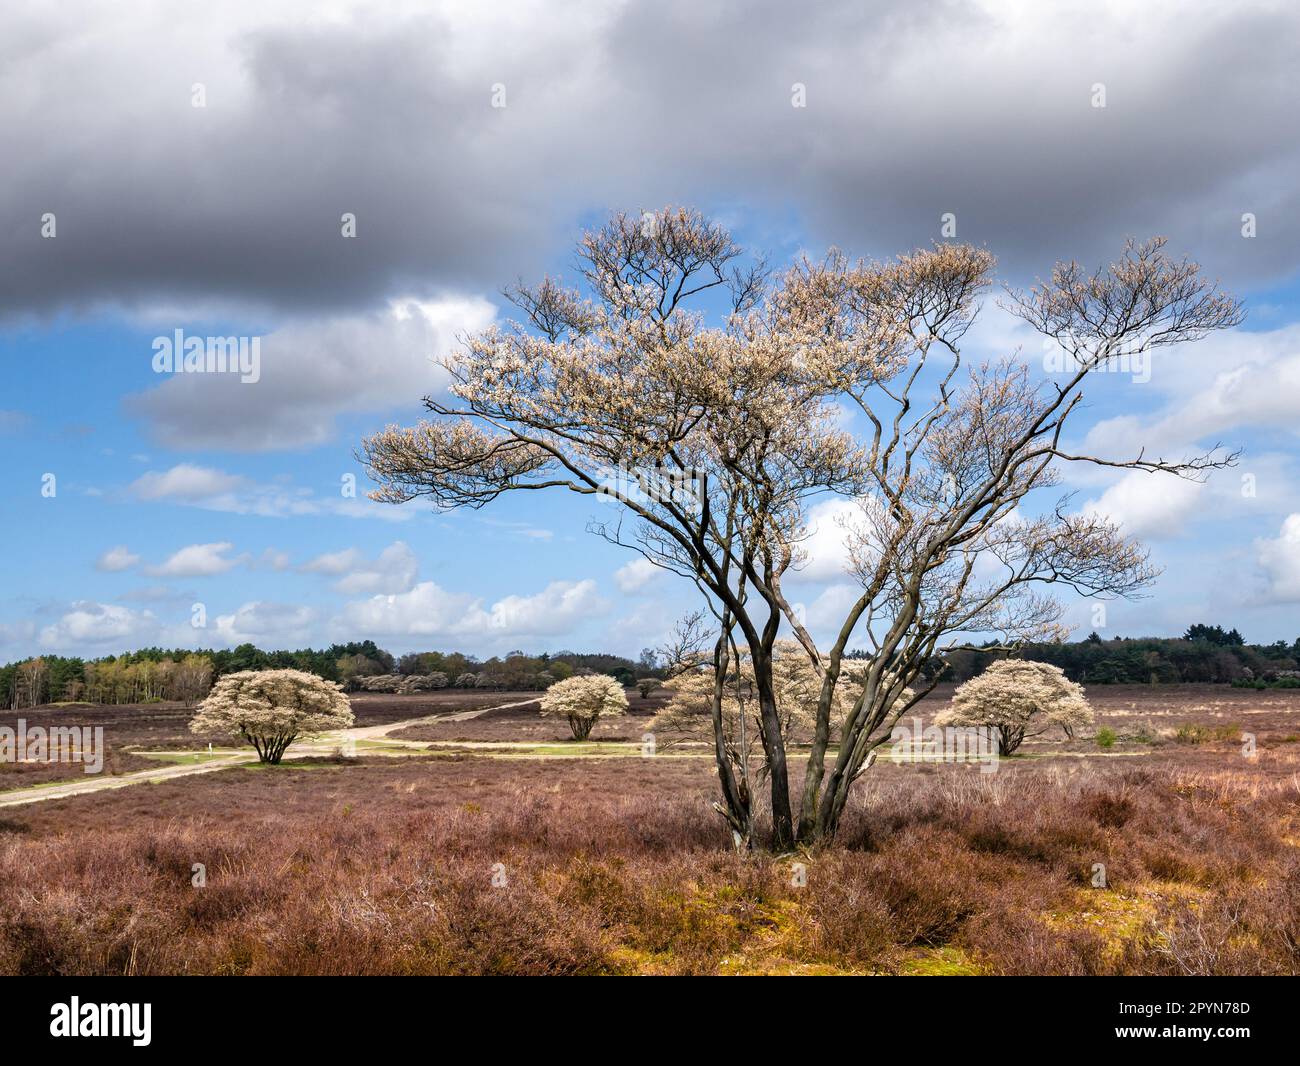 Juneberry or snowy mespilus trees, Amelanchier lamarkii, blooming in spring in nature reserve Zuiderheide, Het Gooi, North Holland, Netherlands Stock Photo